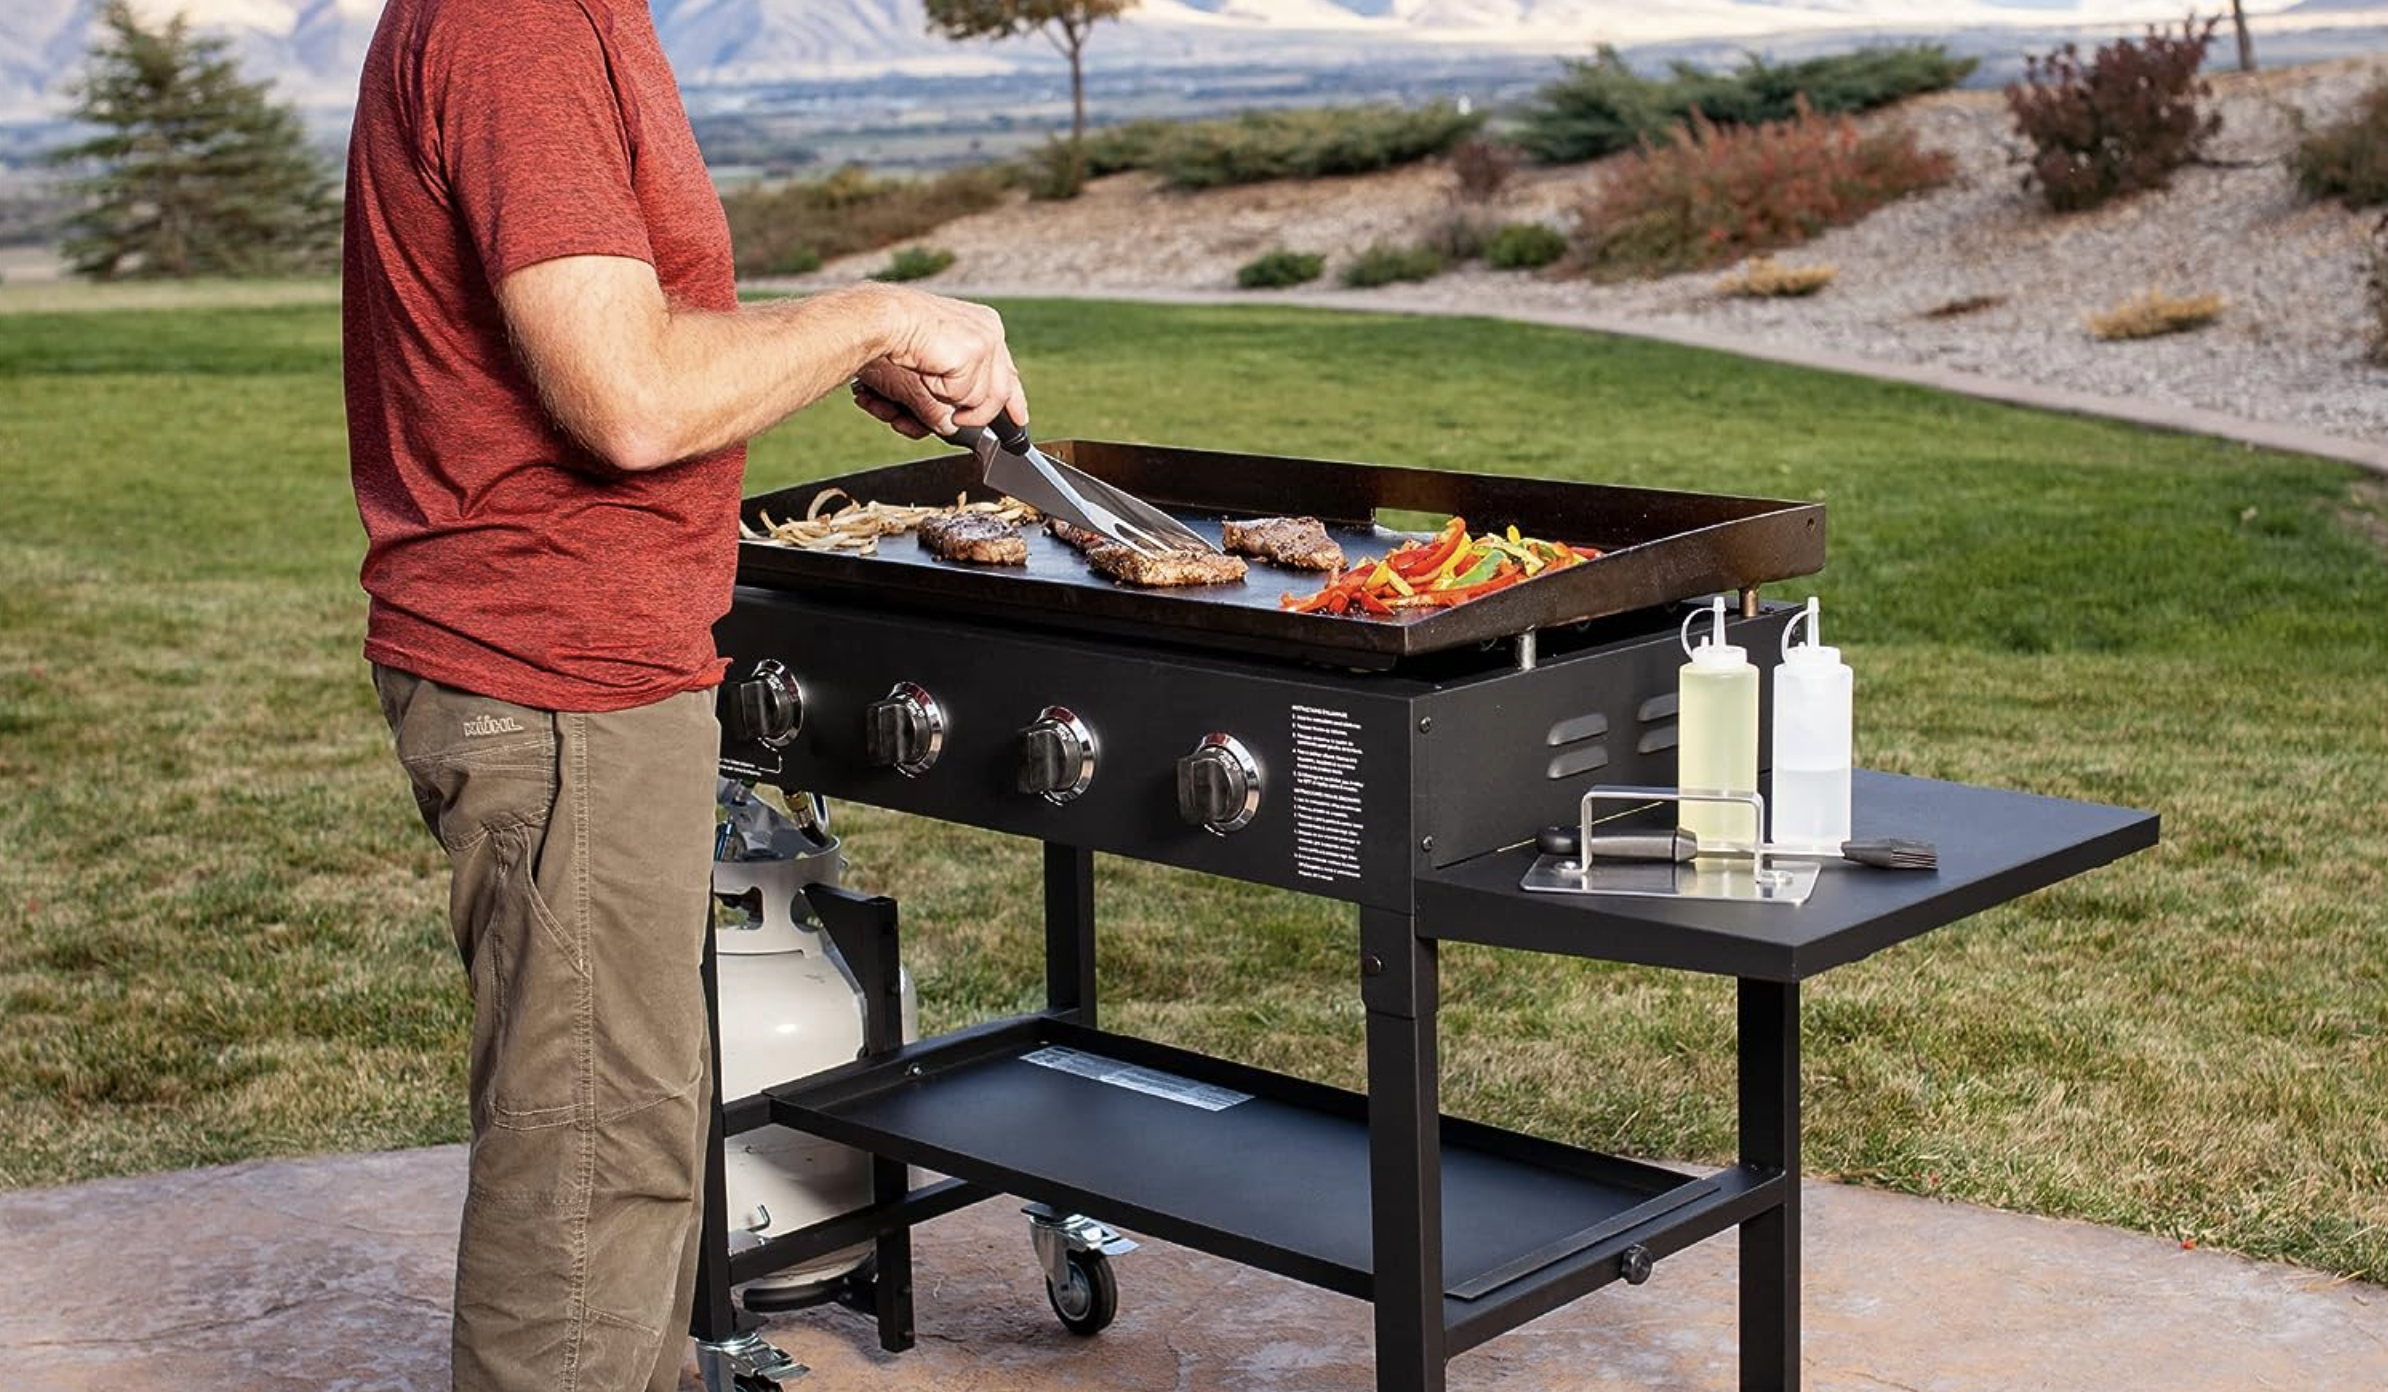 Win an indoor/outdoor grill from George Foreman